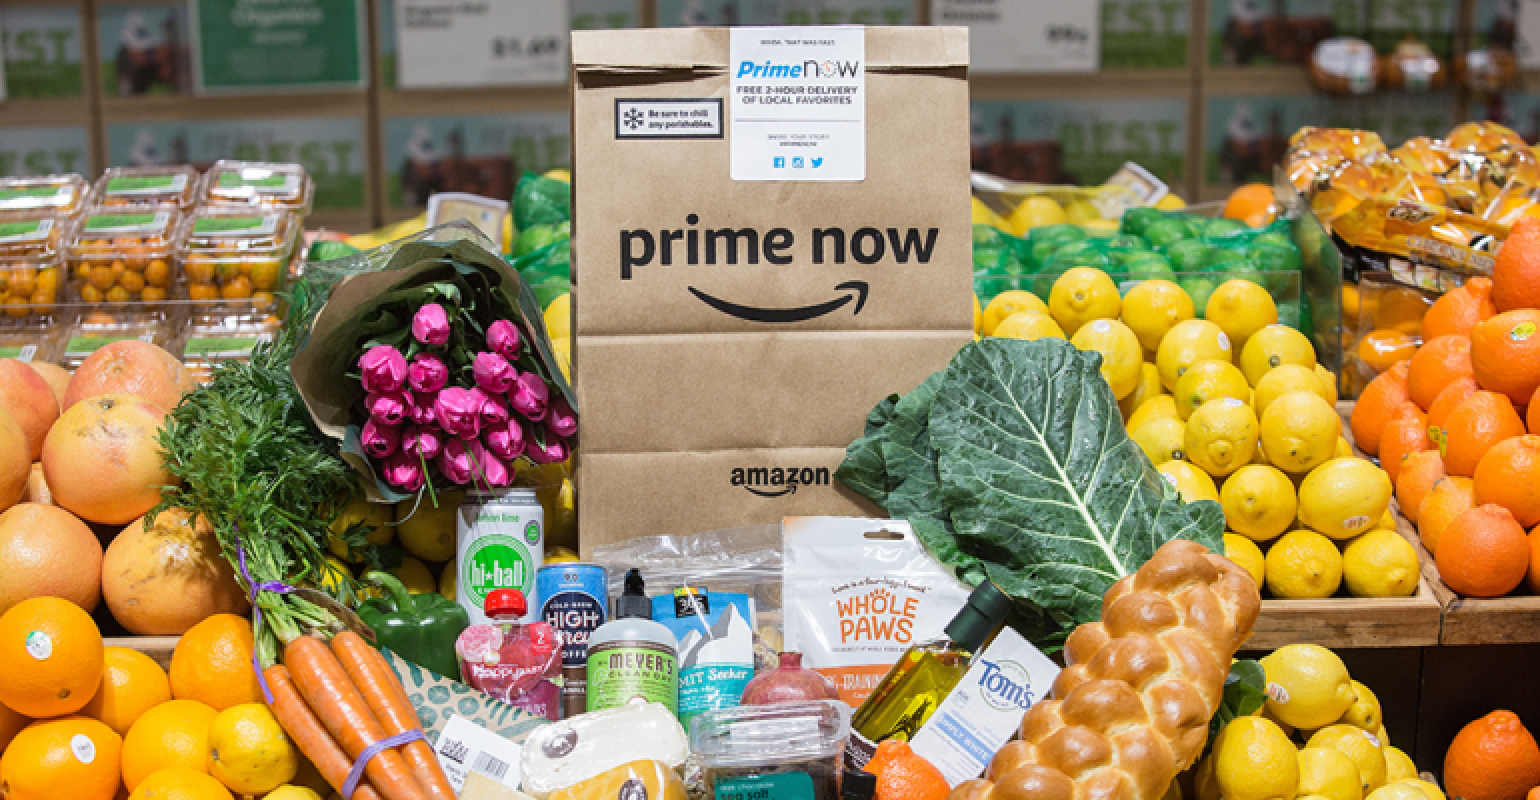 Now Offering Same Day Delivery On Over 1 Million Items For   Prime Members